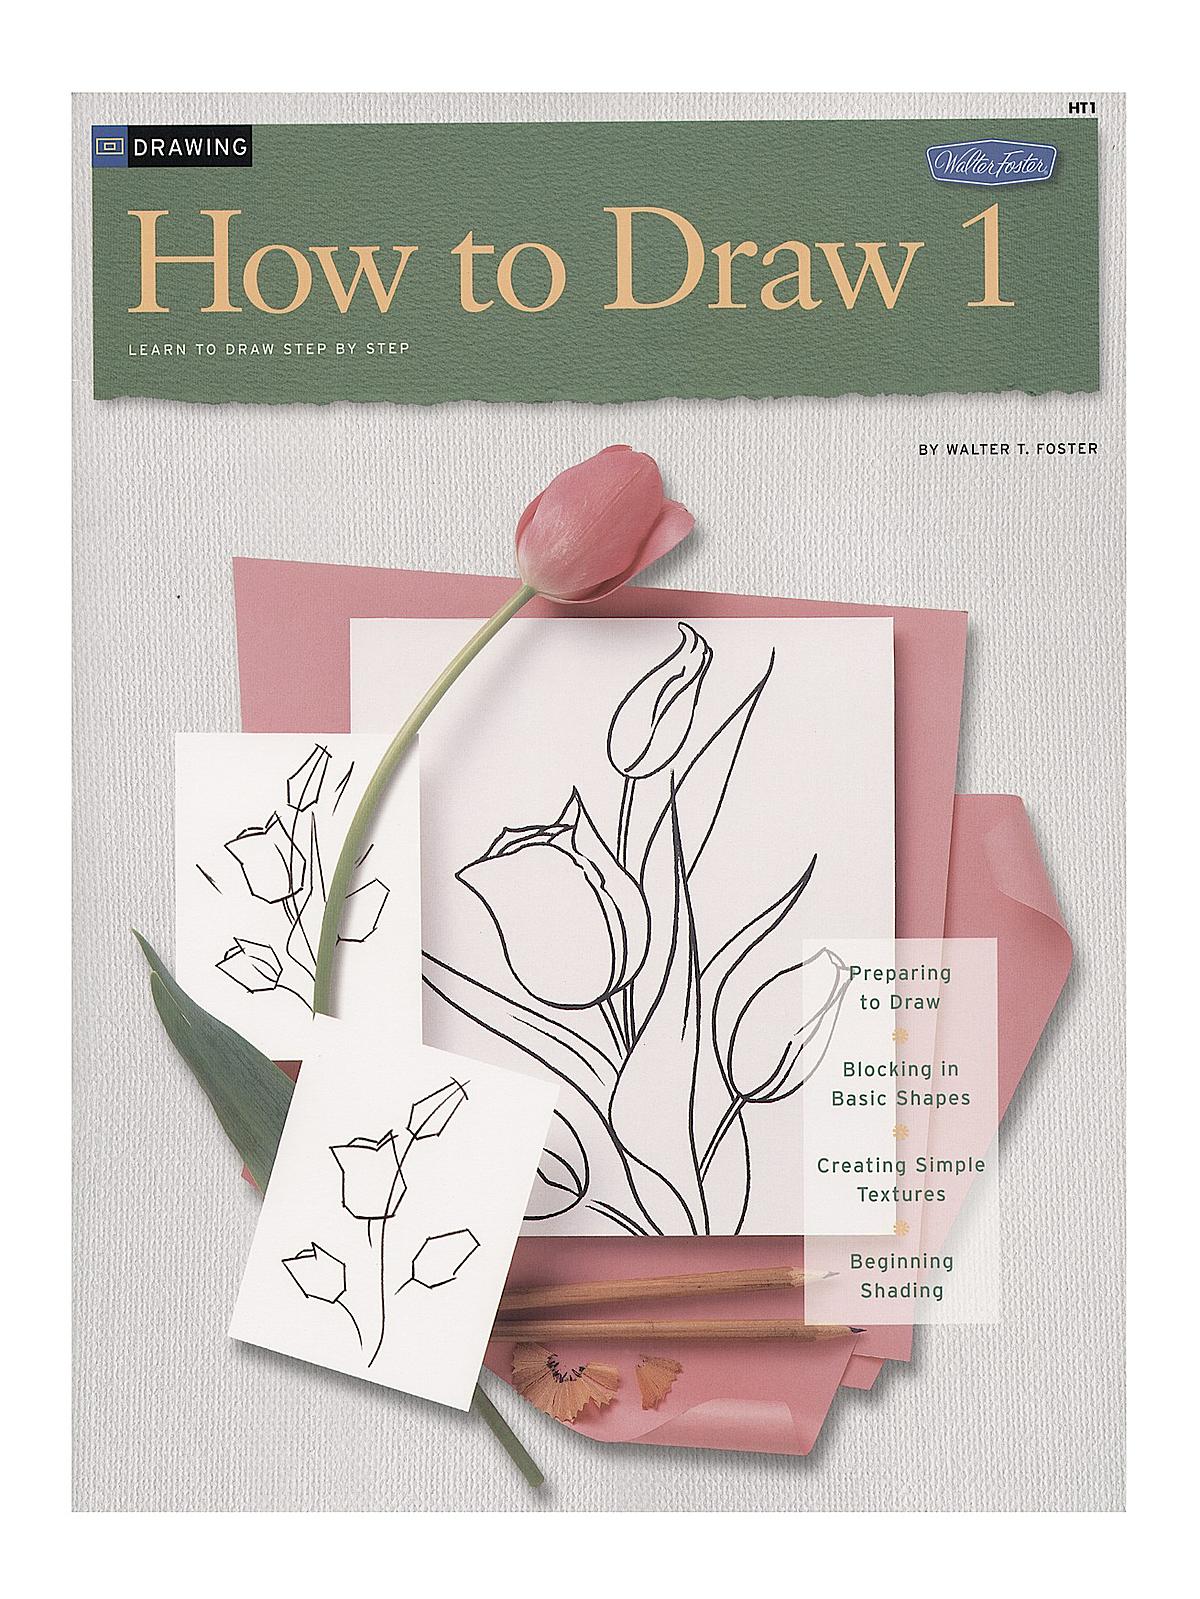 How To Series: Drawing How To Draw 1